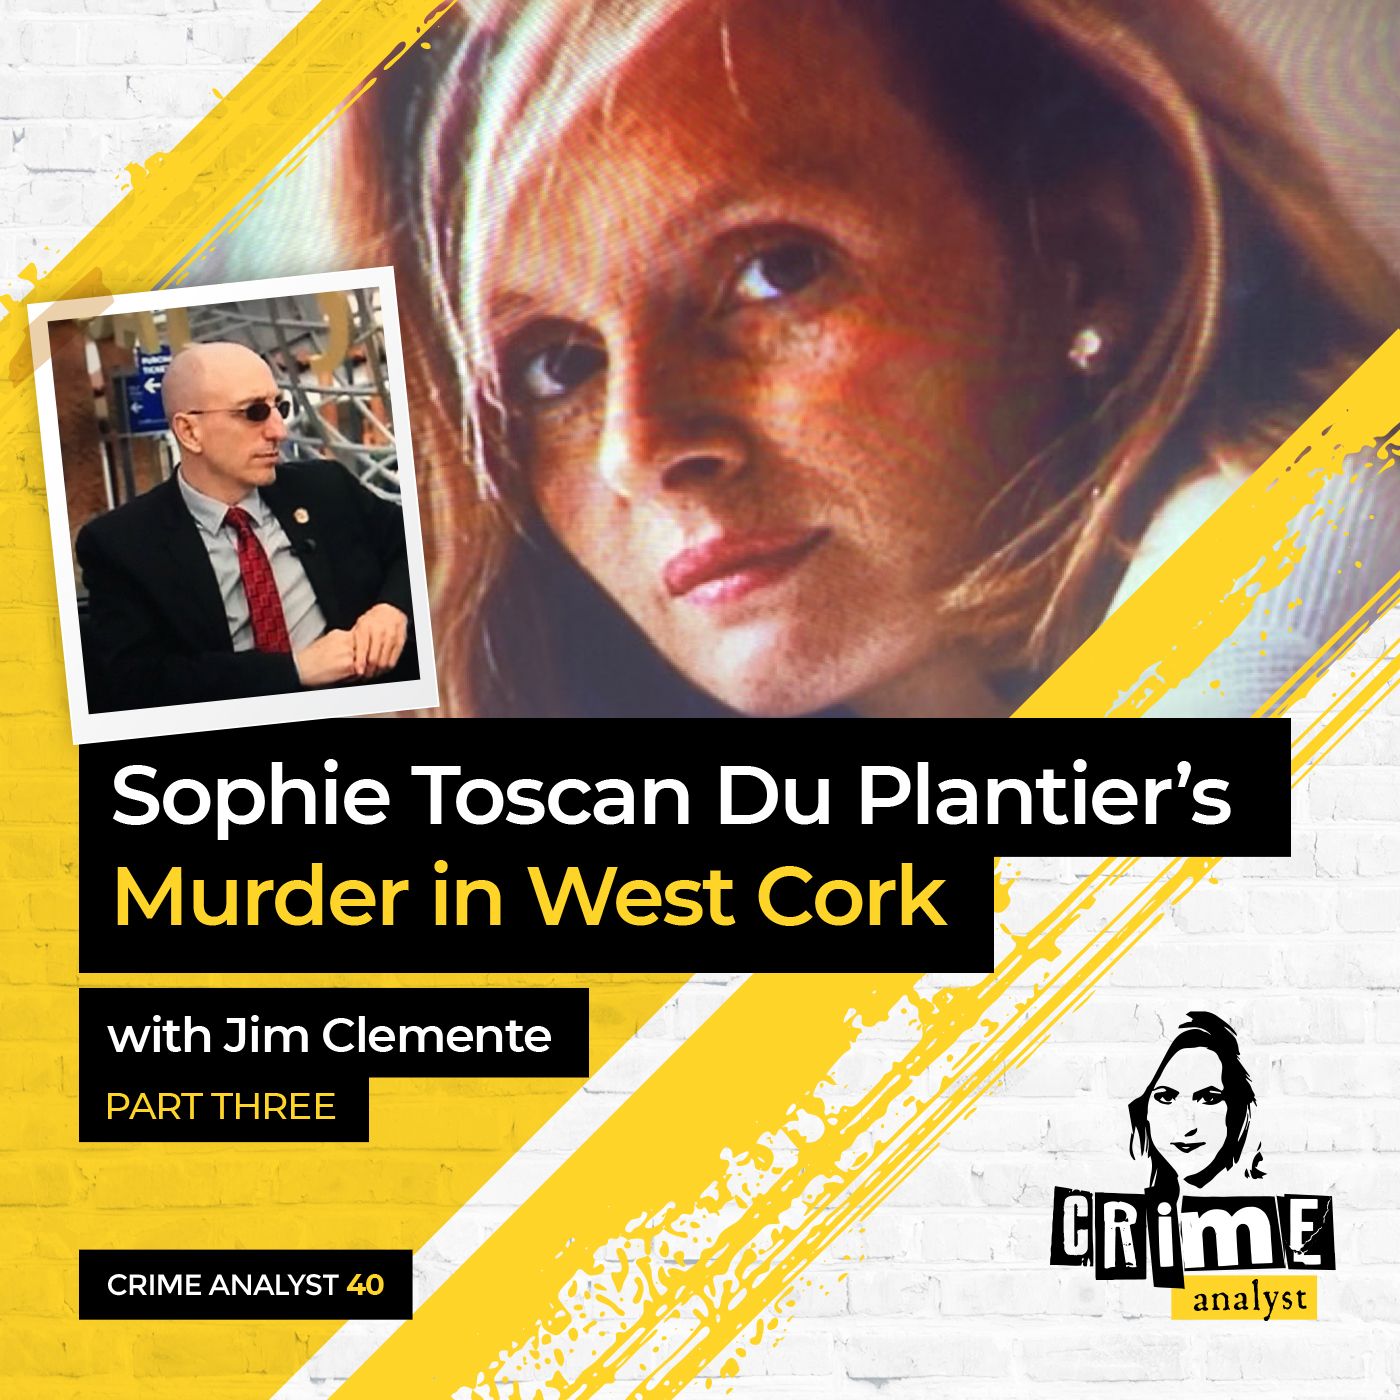 40: The Crime Analyst | Ep 40 | Sophie Toscan Du Plantier’s Murder with Jim Clemente, Part 3 Image